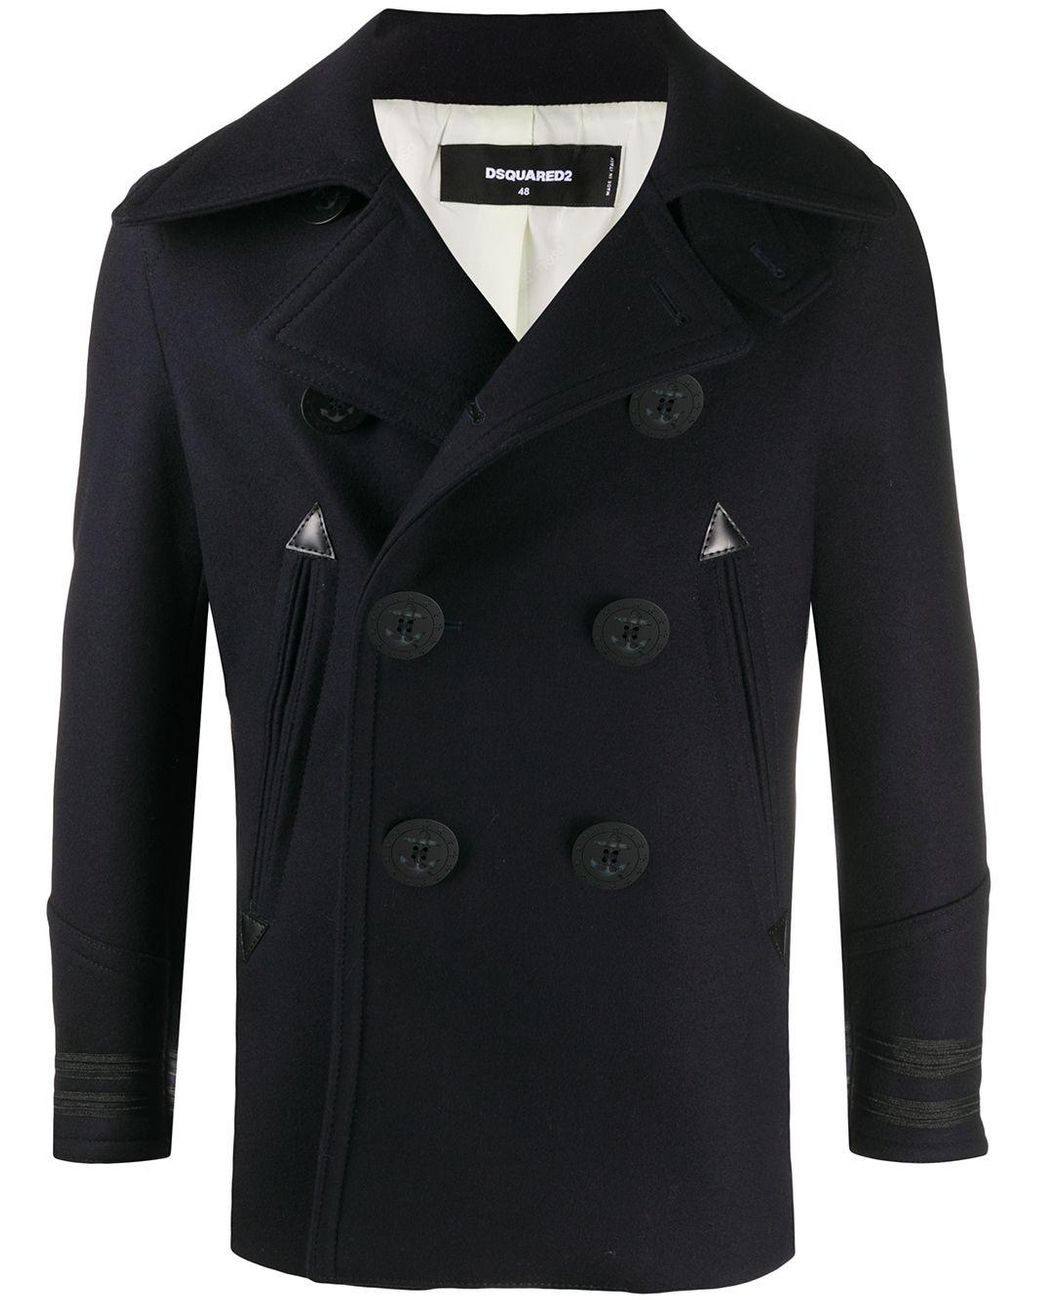 DSquared² Cotton Double-breasted Coat in Black for Men - Lyst